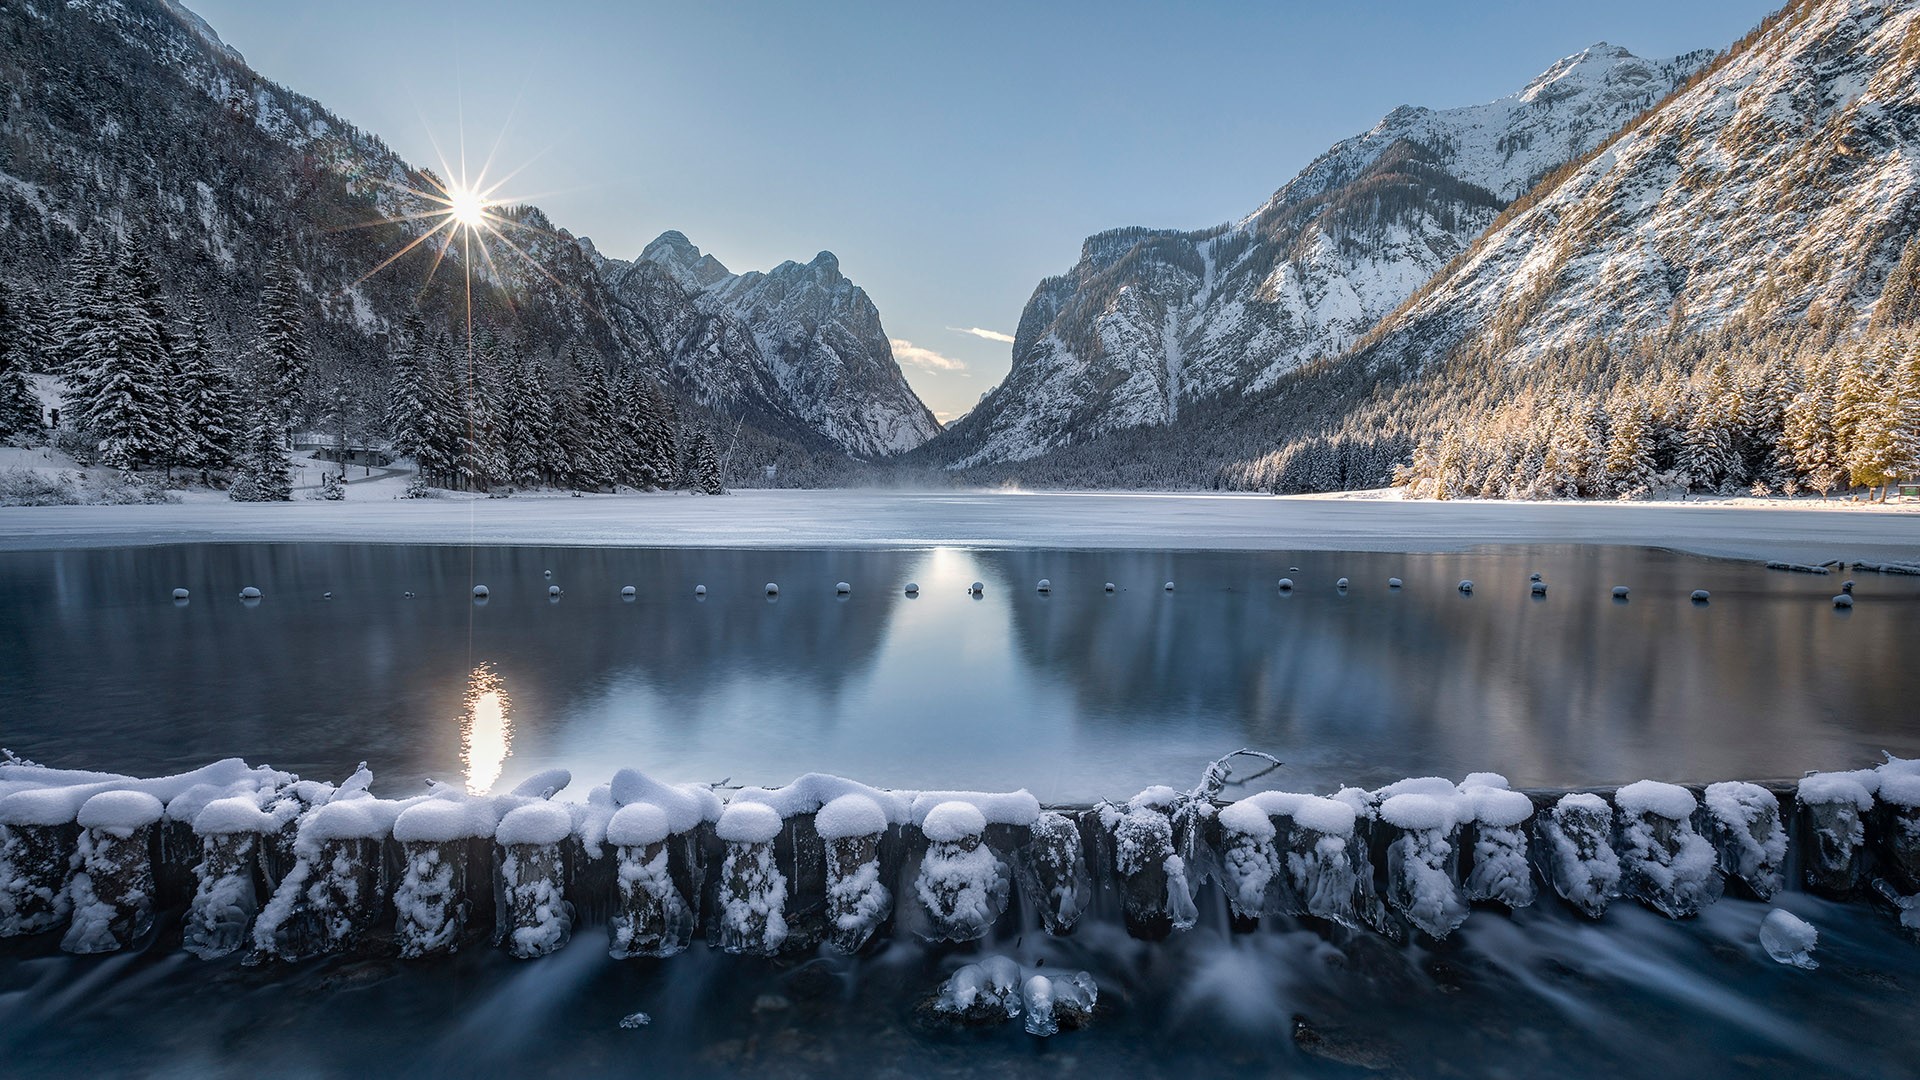 General 1920x1080 nature landscape mountains river water Italy sunrise ice winter